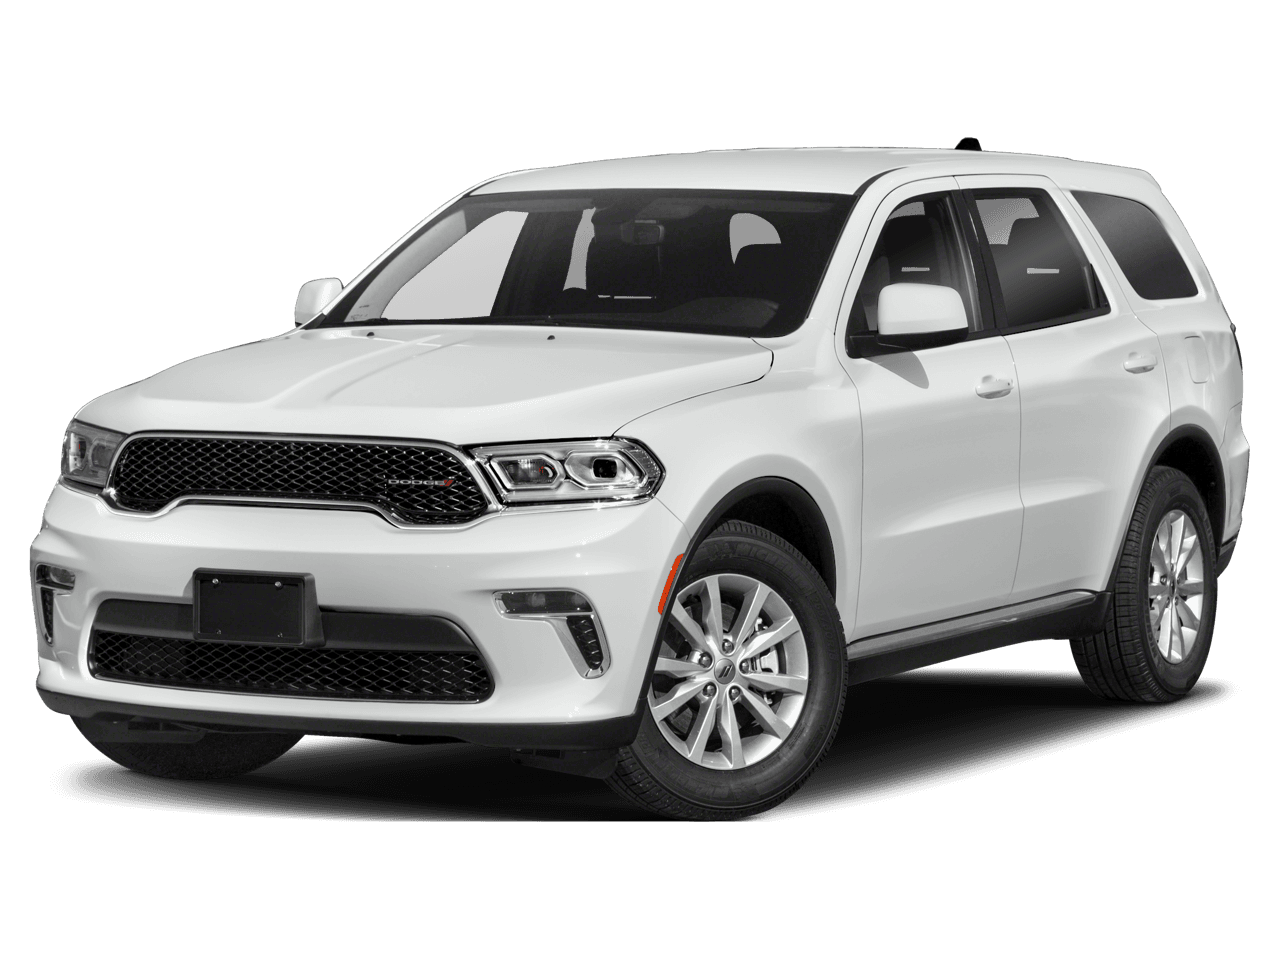 2022 Dodge Durango Photo in Wooster, OH 44691